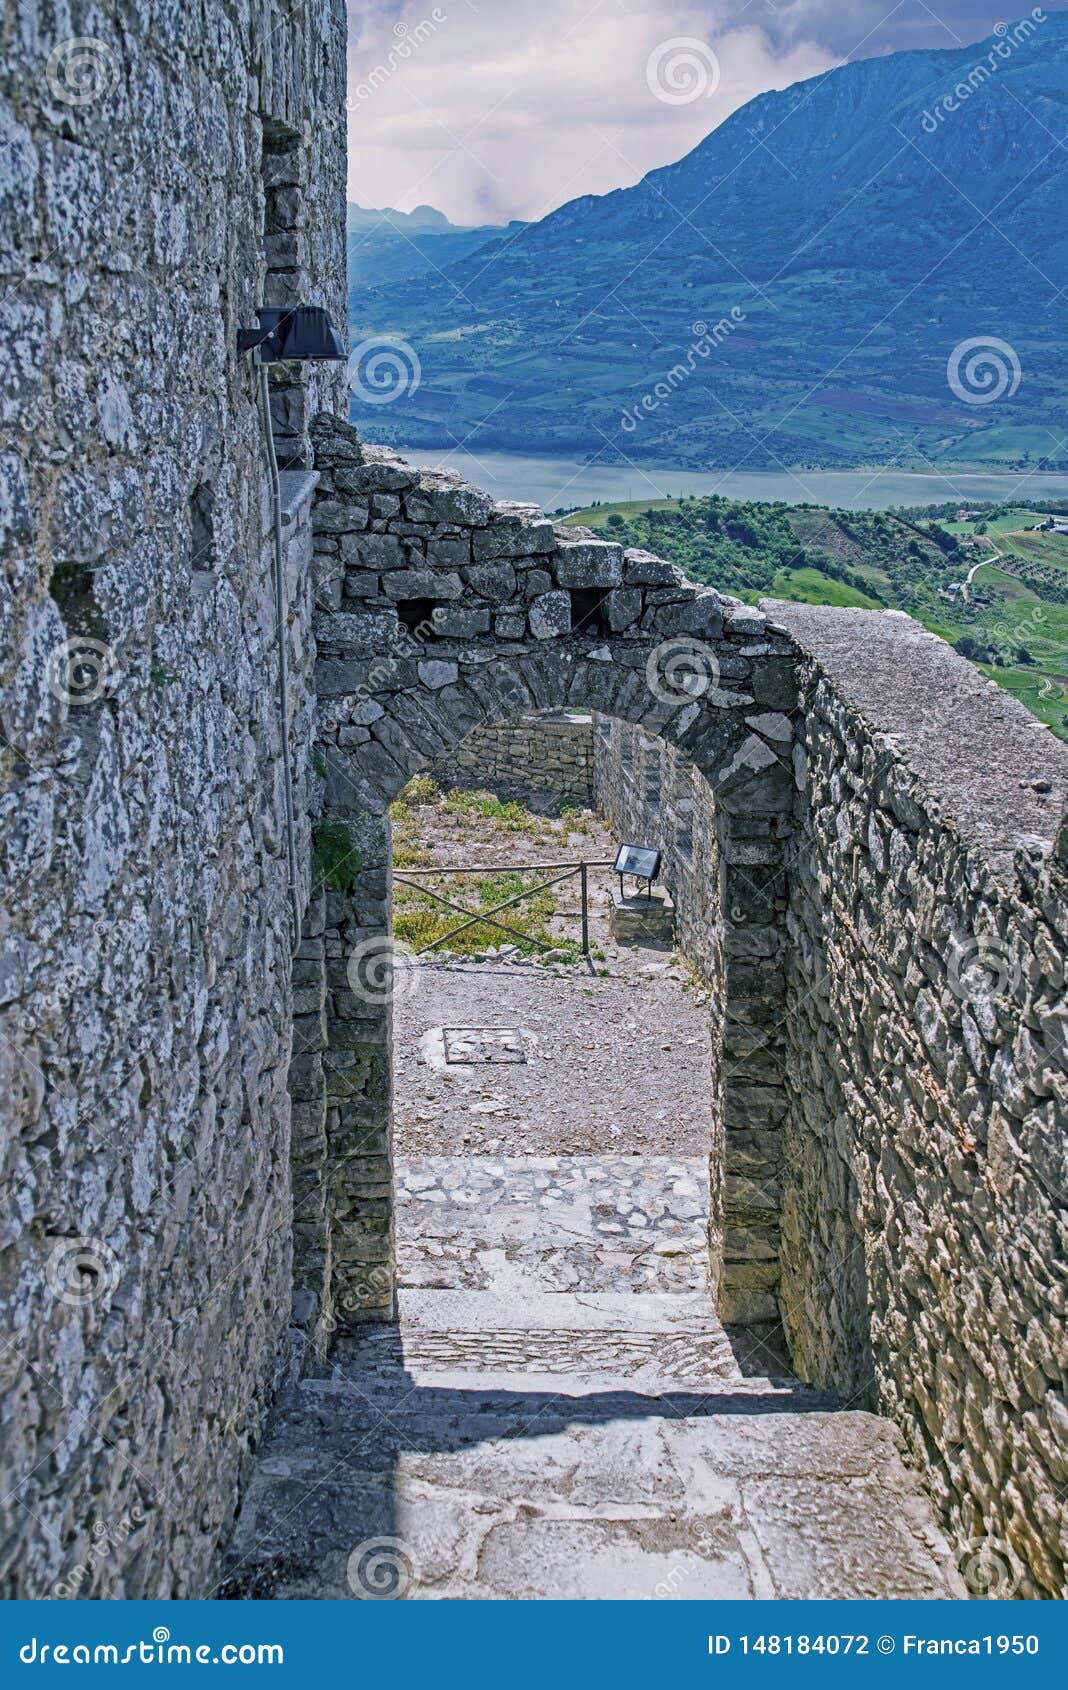 the norman castle in caccamo with the view of the beginning of the lake rosamarina